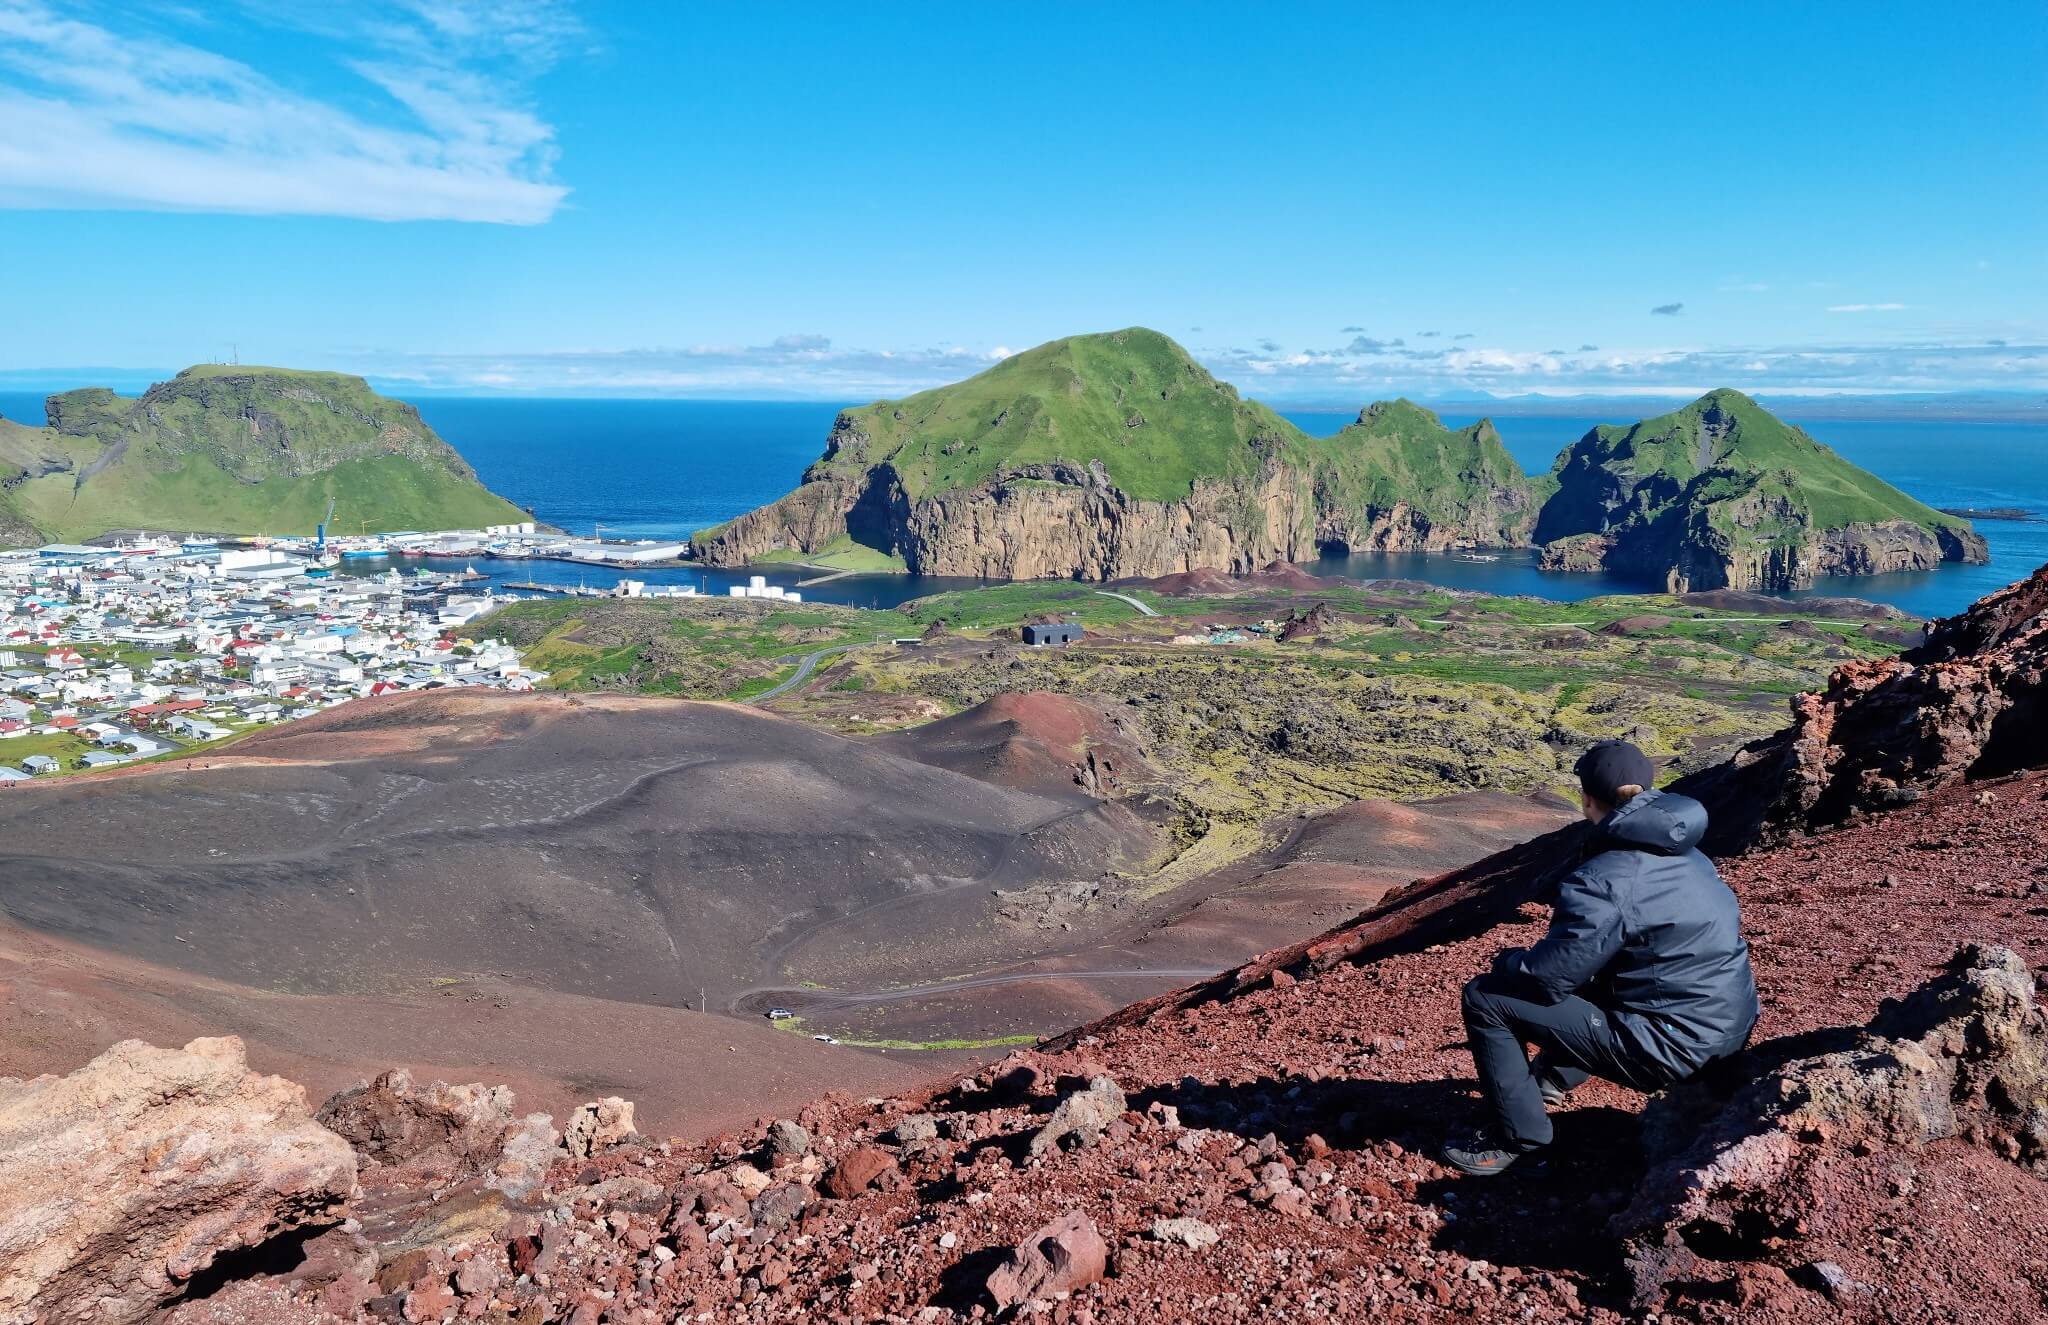 Westman Islands – Full Guide + Top Things to Do [our experience]